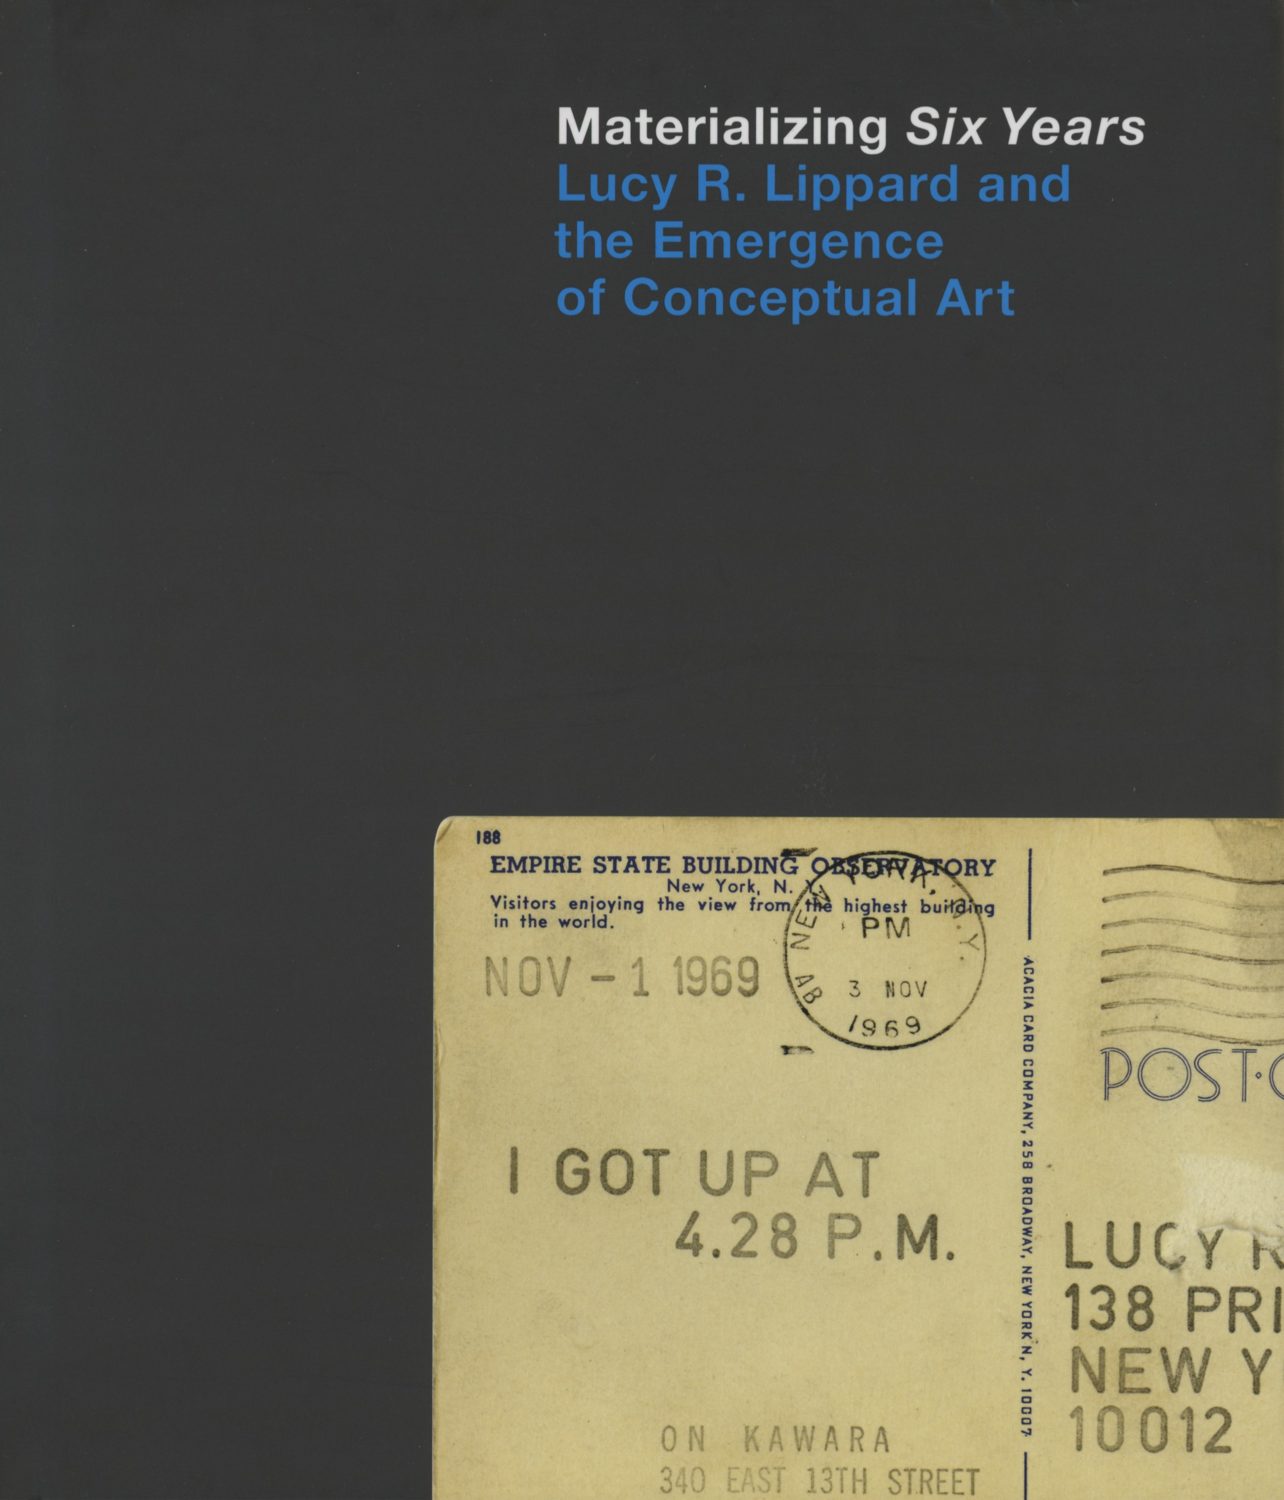 Materializing Six Years Lucy R. Lippard and the Emergence of Conceptual Art